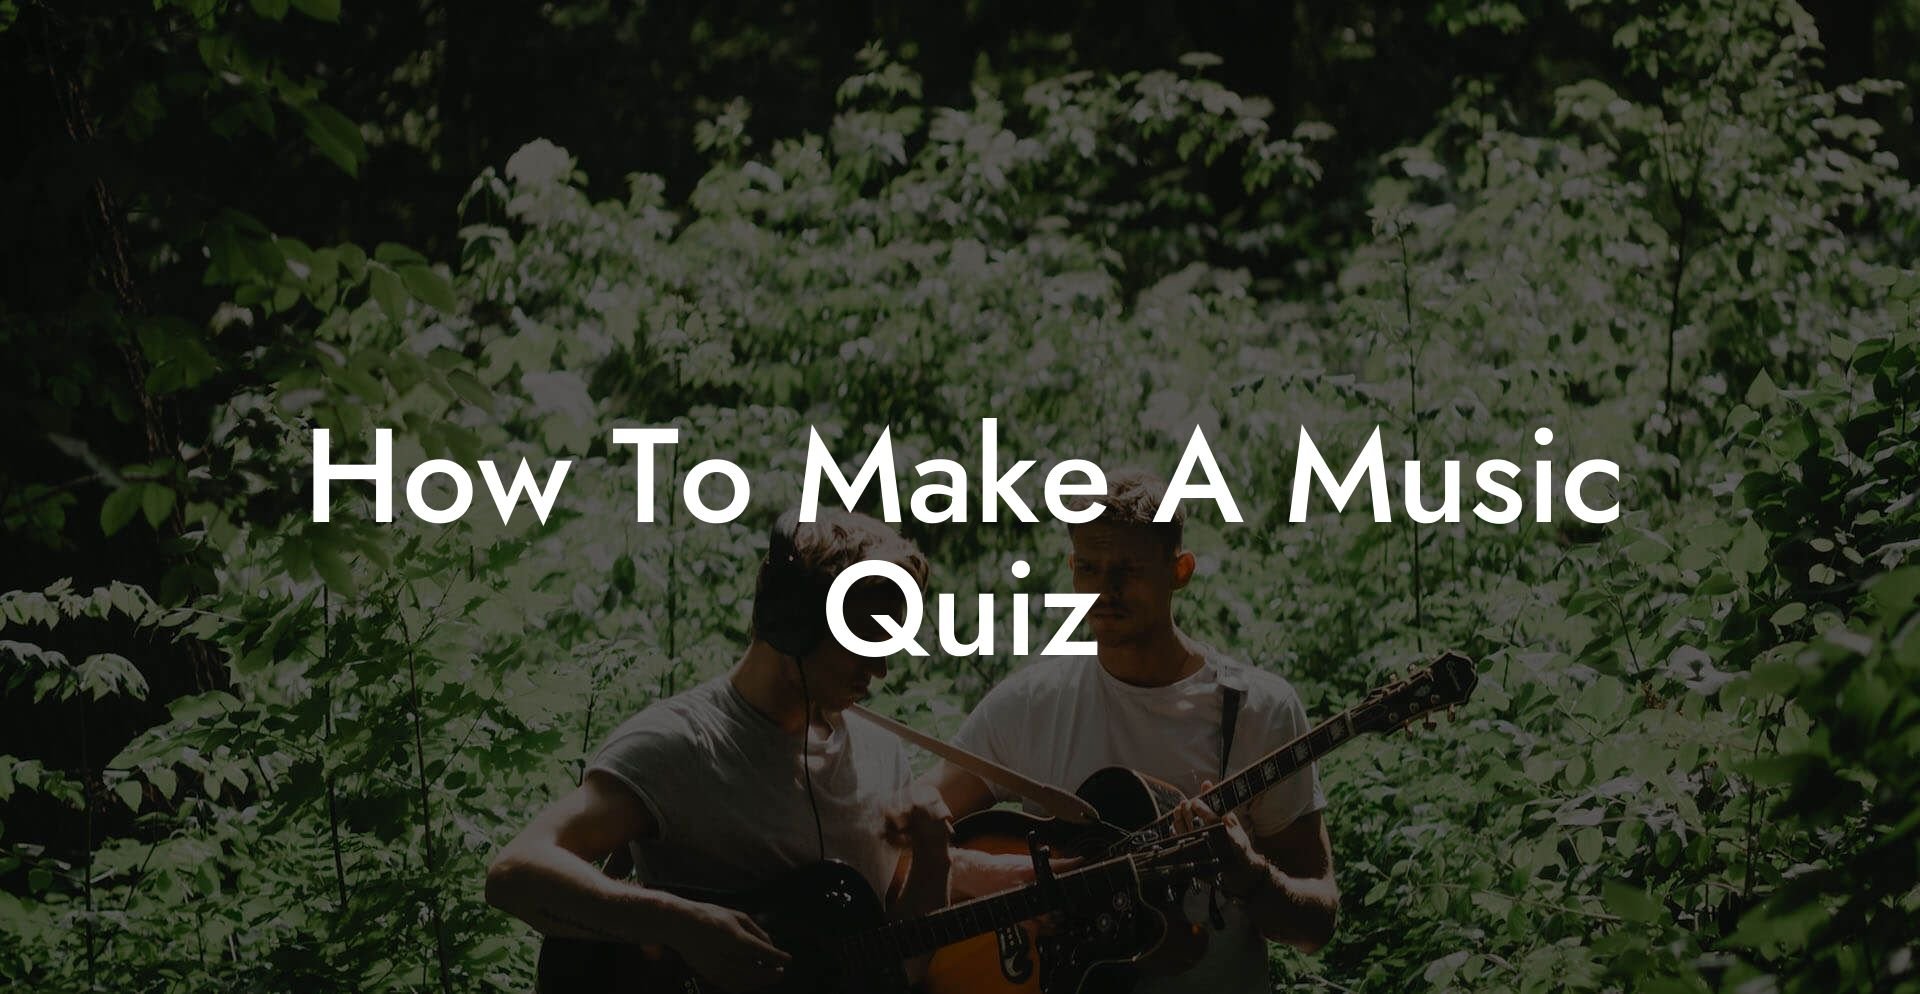 how to make a music quiz lyric assistant